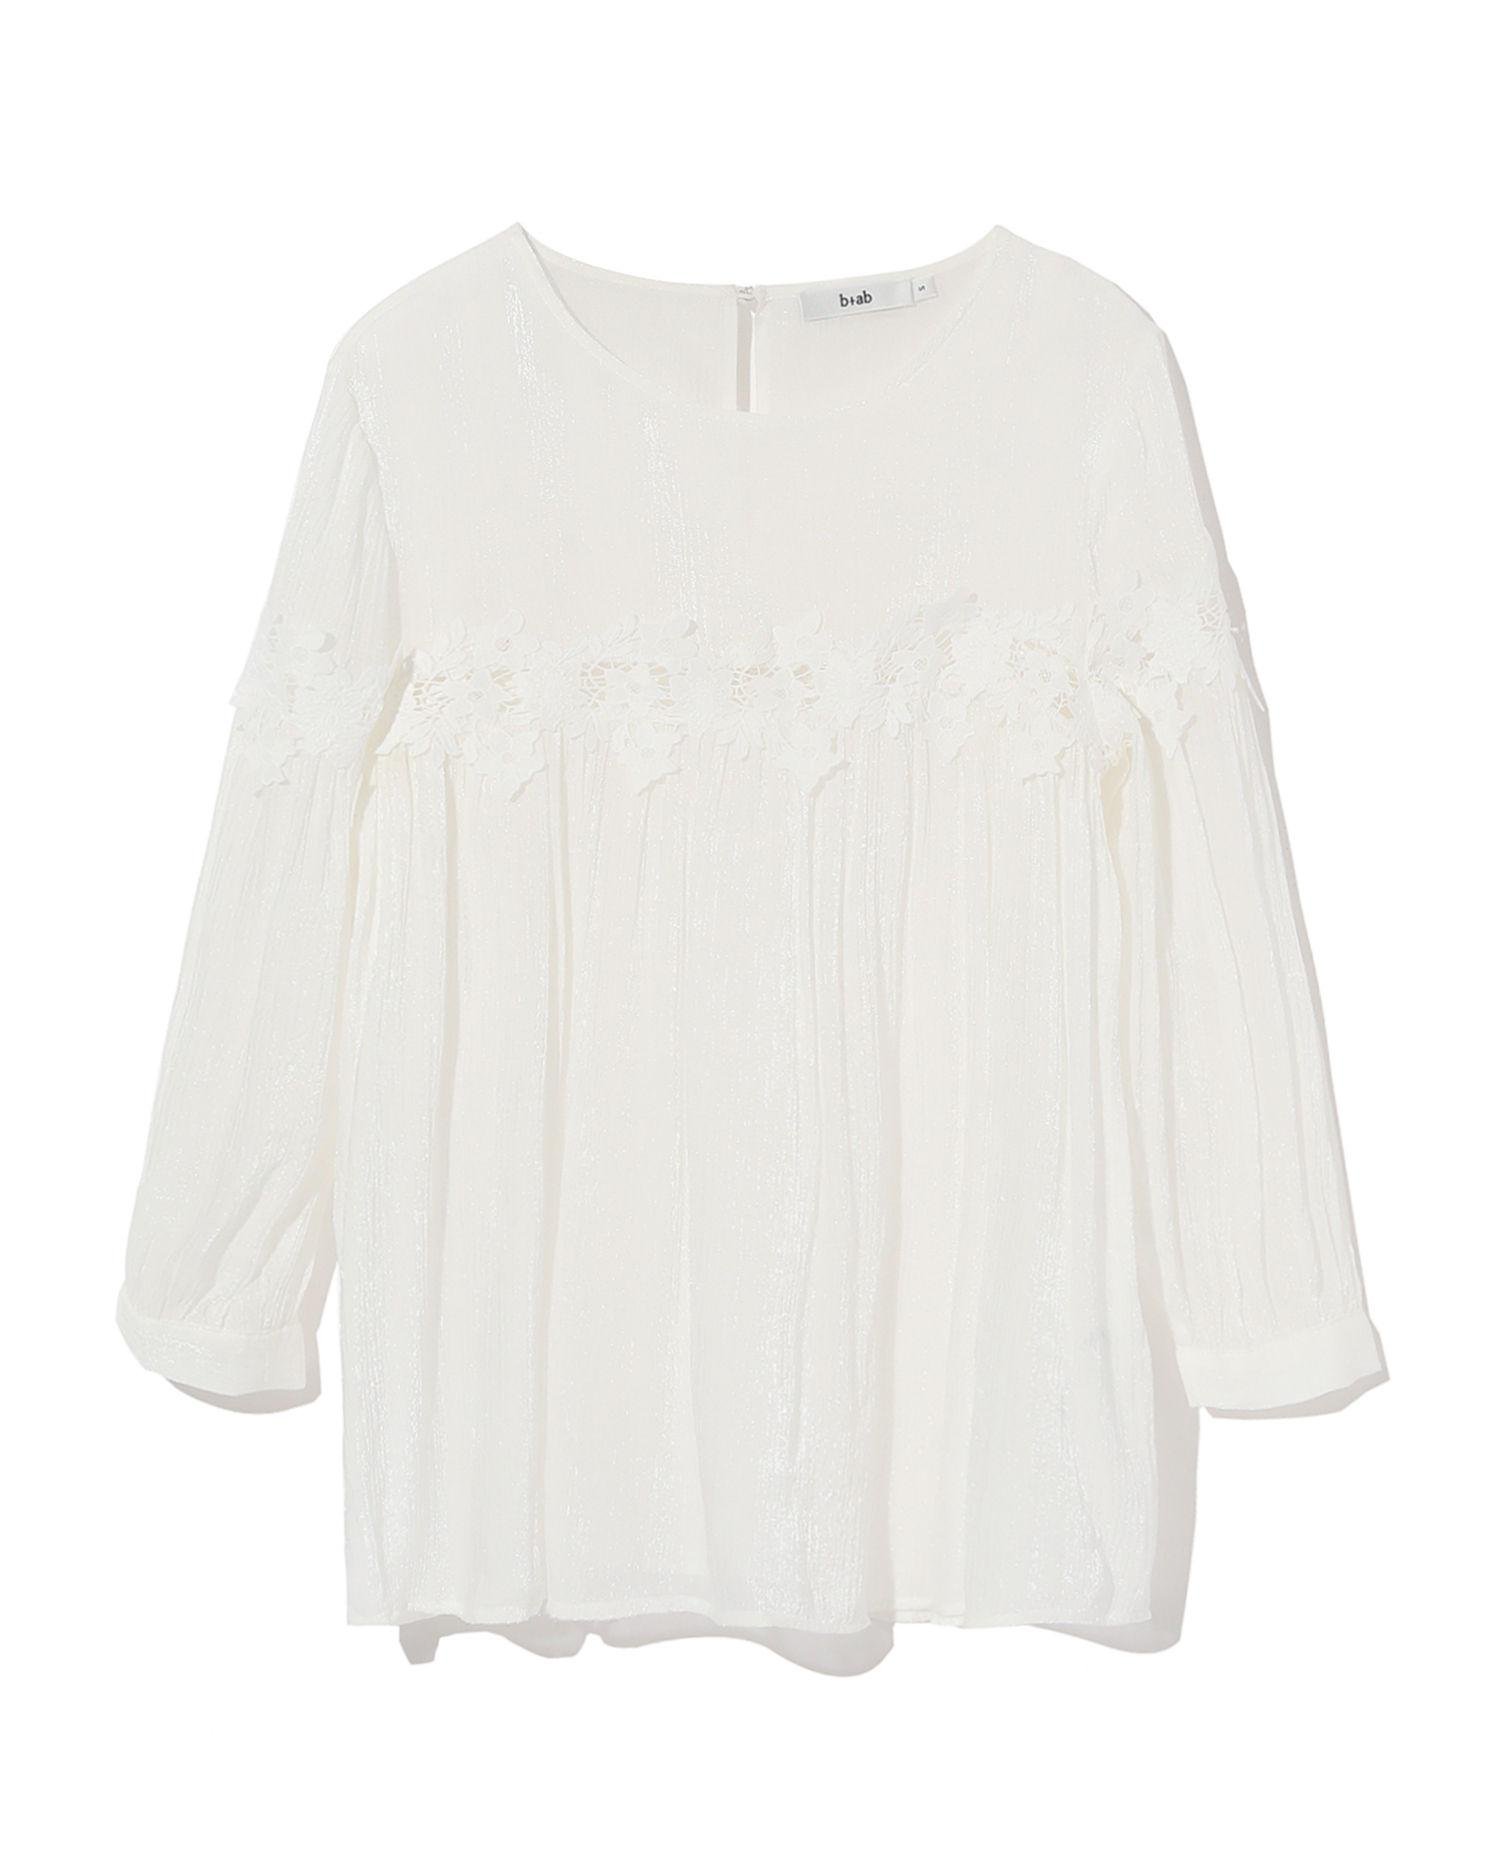 Lace panelled top by B+AB